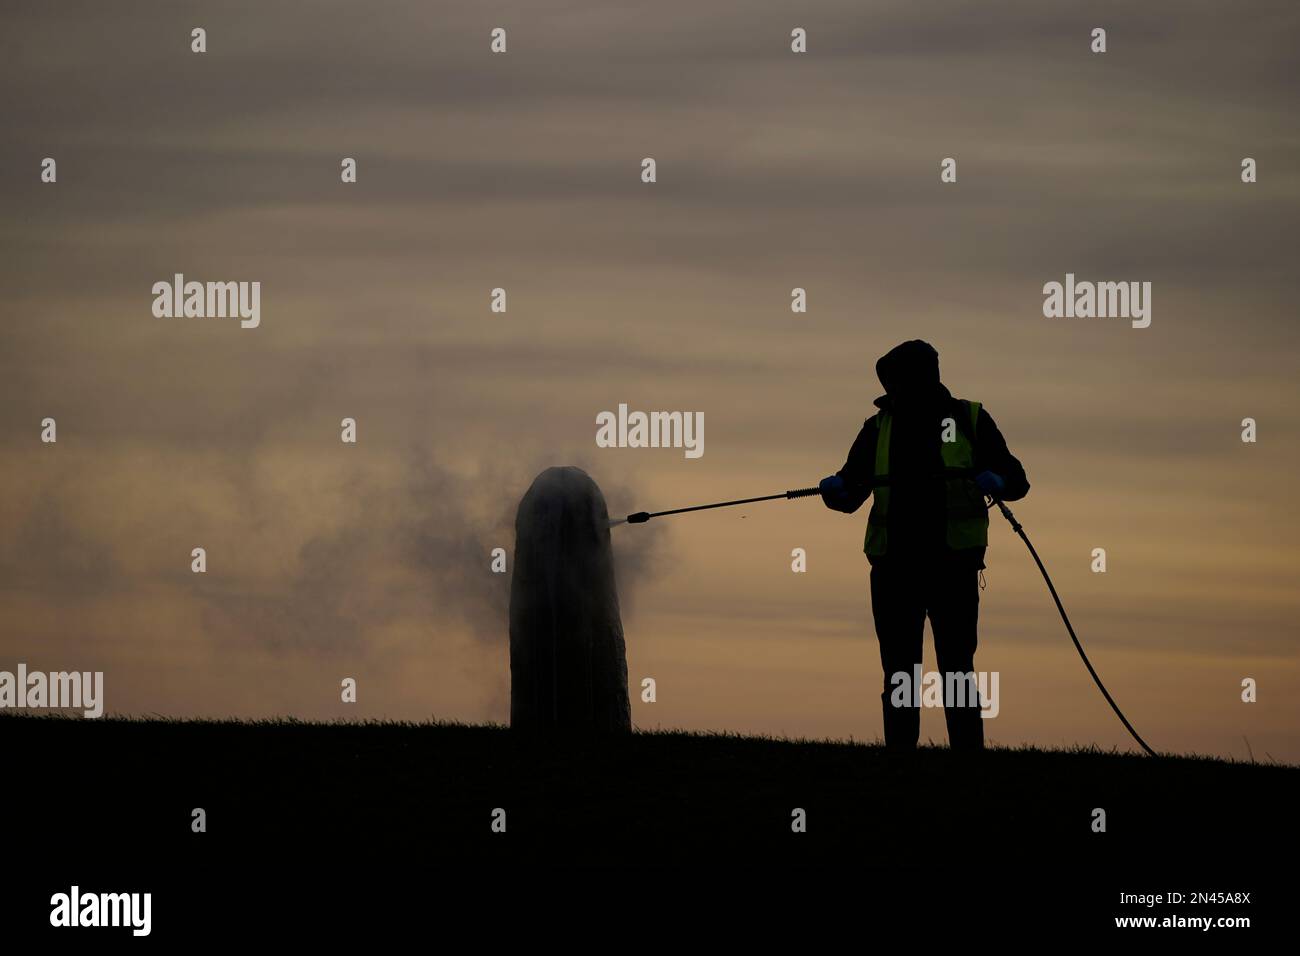 A worker from the office of public works begin the clean up of graffiti on the Lia Fail standing stone, which is also known as the Stone of Destiny, on the Hill of Tara near Skryne in County Meath. Picture date: Wednesday February 8, 2023. Stock Photo